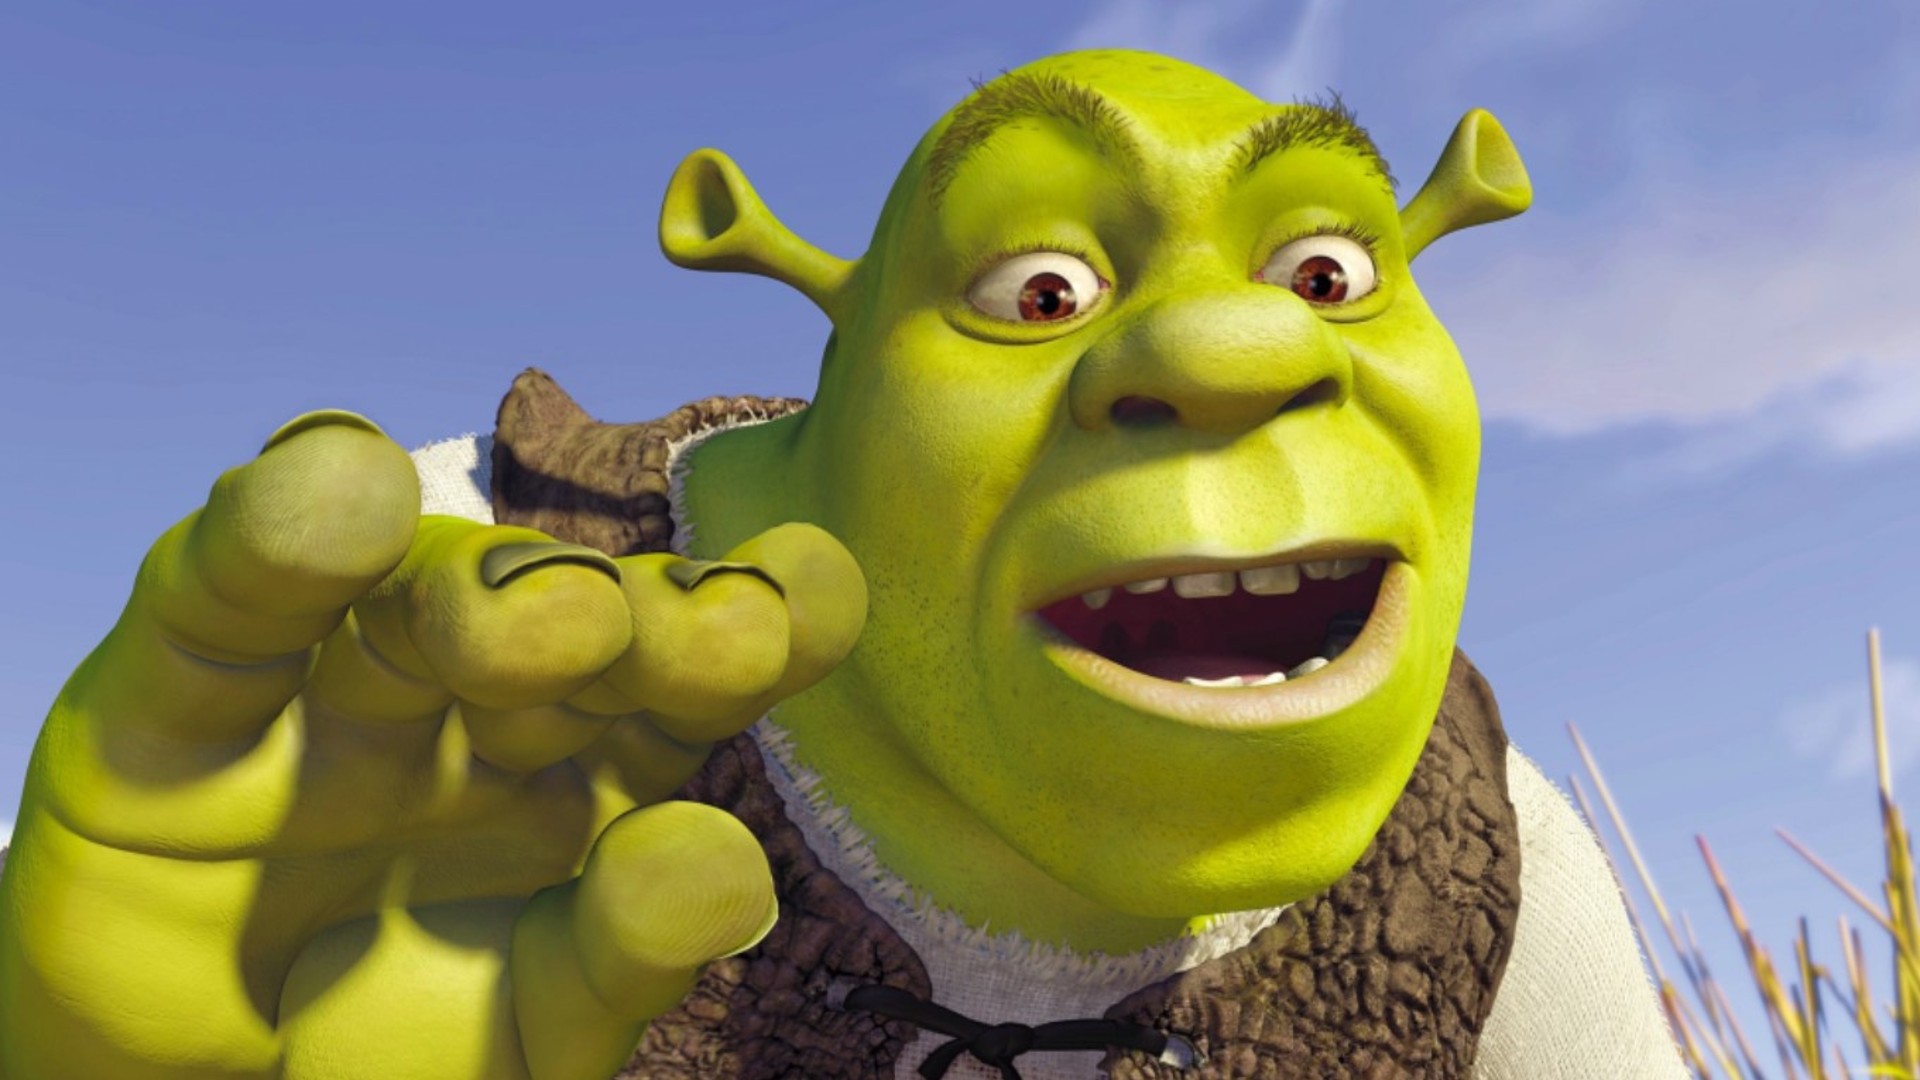 Here’s why Shrek has a Scottish accent, according to Mike Myers